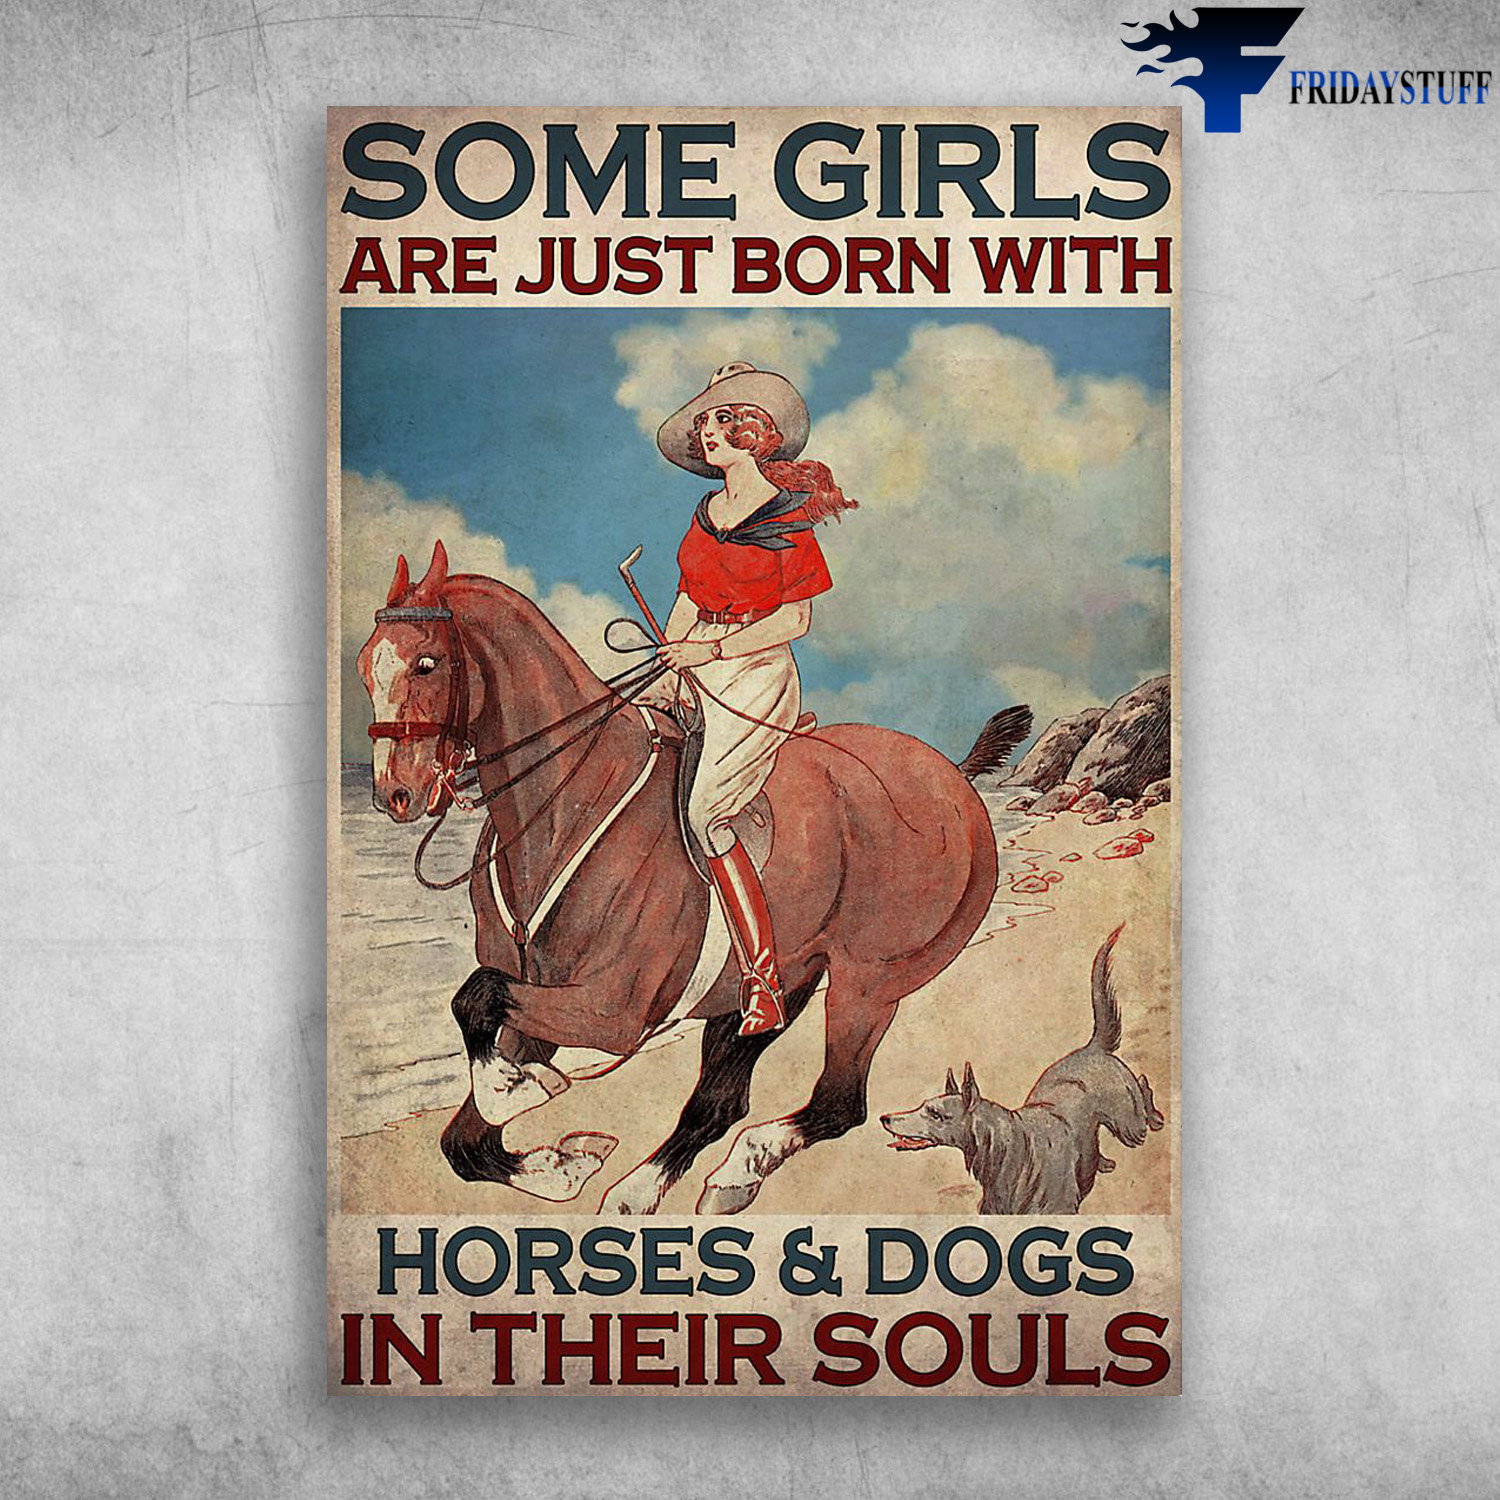 Girl Riding Horse And A Dog - Some Girls Are Just Born With Horses & Dogs In Their Souls